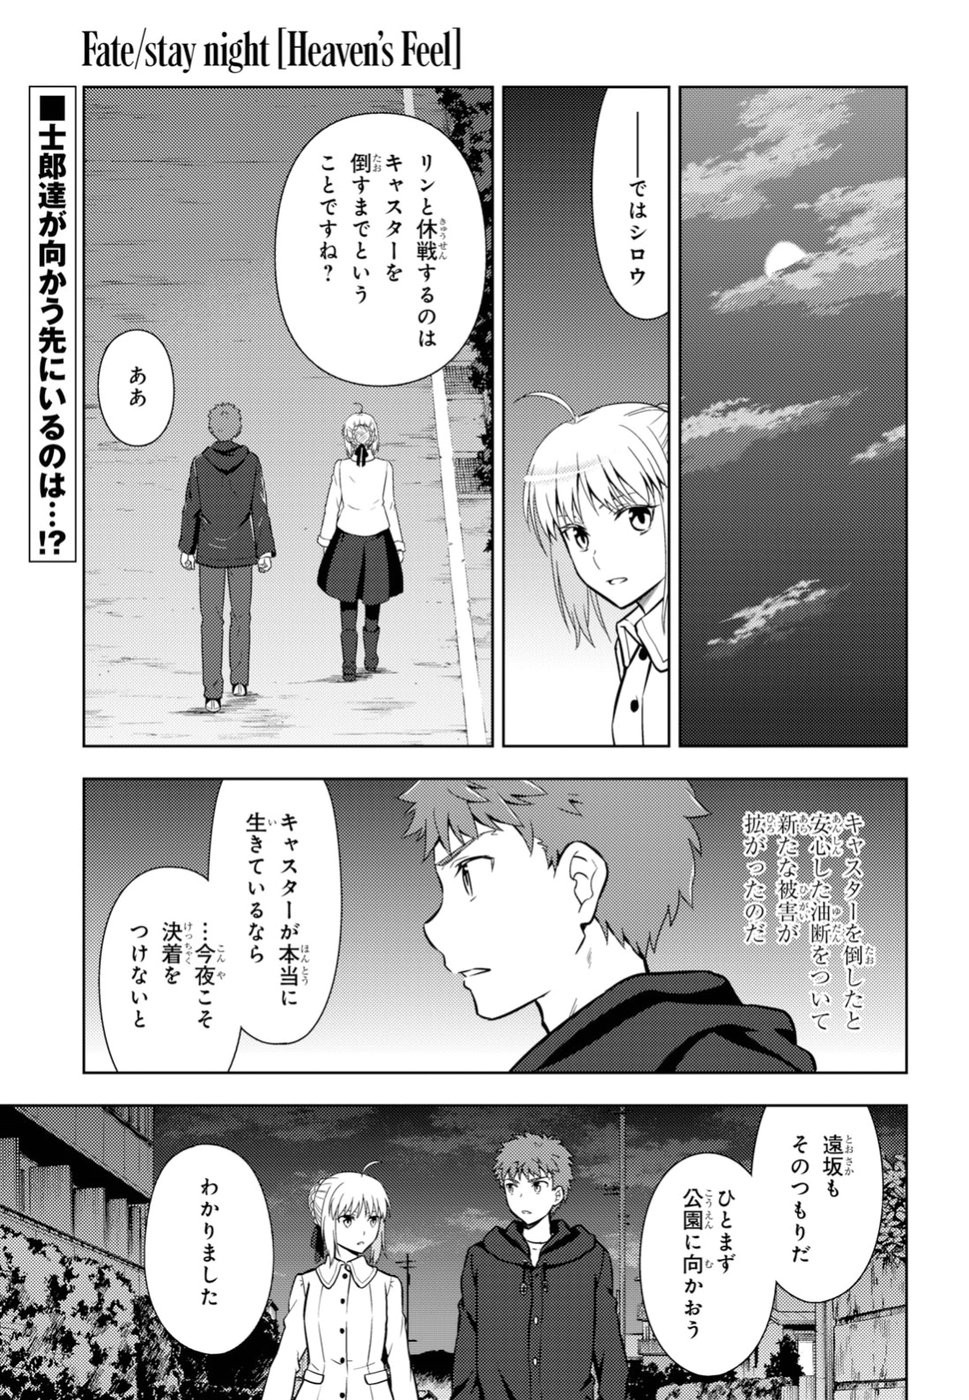 Fate/Stay night Heaven's Feel - Chapter 44 - Page 1